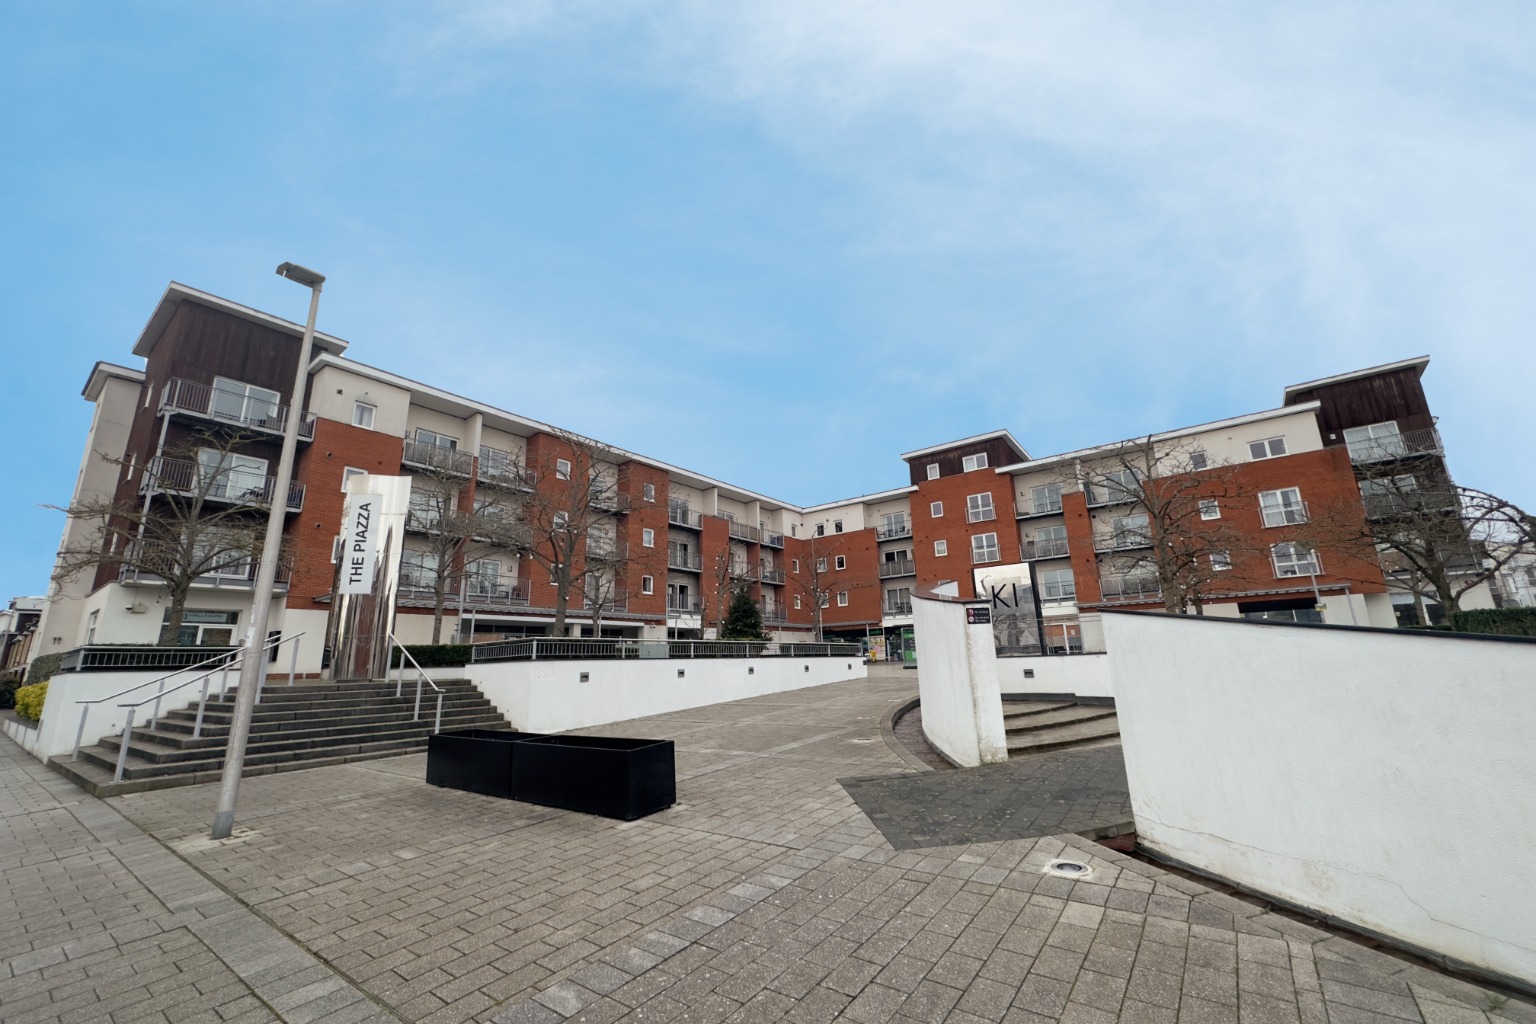 1 bed flat for sale in Whale Avenue, Reading - Property Image 1